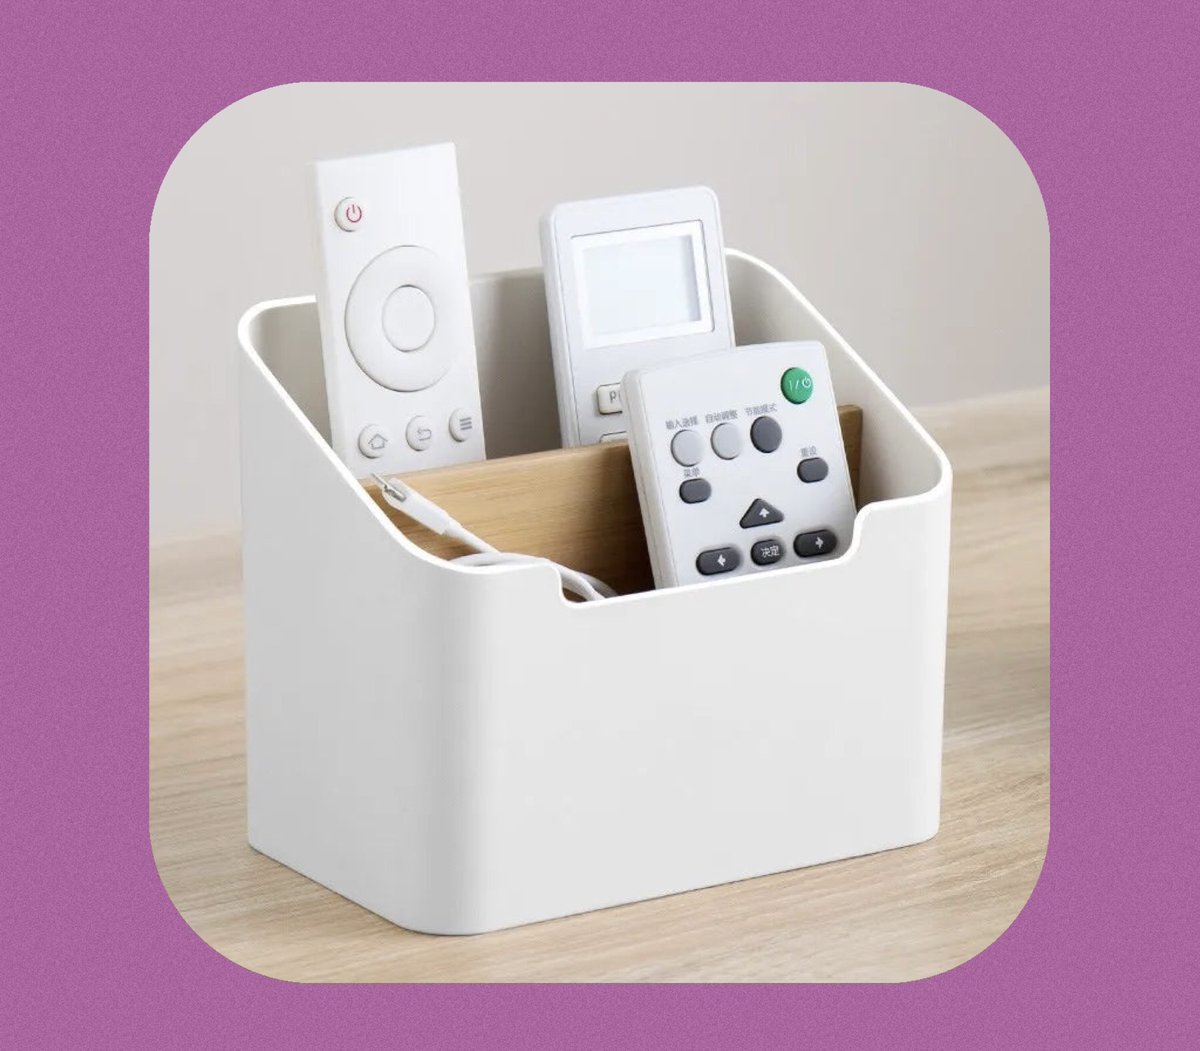 To #win a multi function storage box, simply LIKE, FOLLOW, AND RETWEET UK ENTRIES ONLY PLEASE This giveaway runs on all social media until midnight on April 30th, winner will then be contacted the following day! This giveaway is not endorsed by Facebook, Instagram or X!